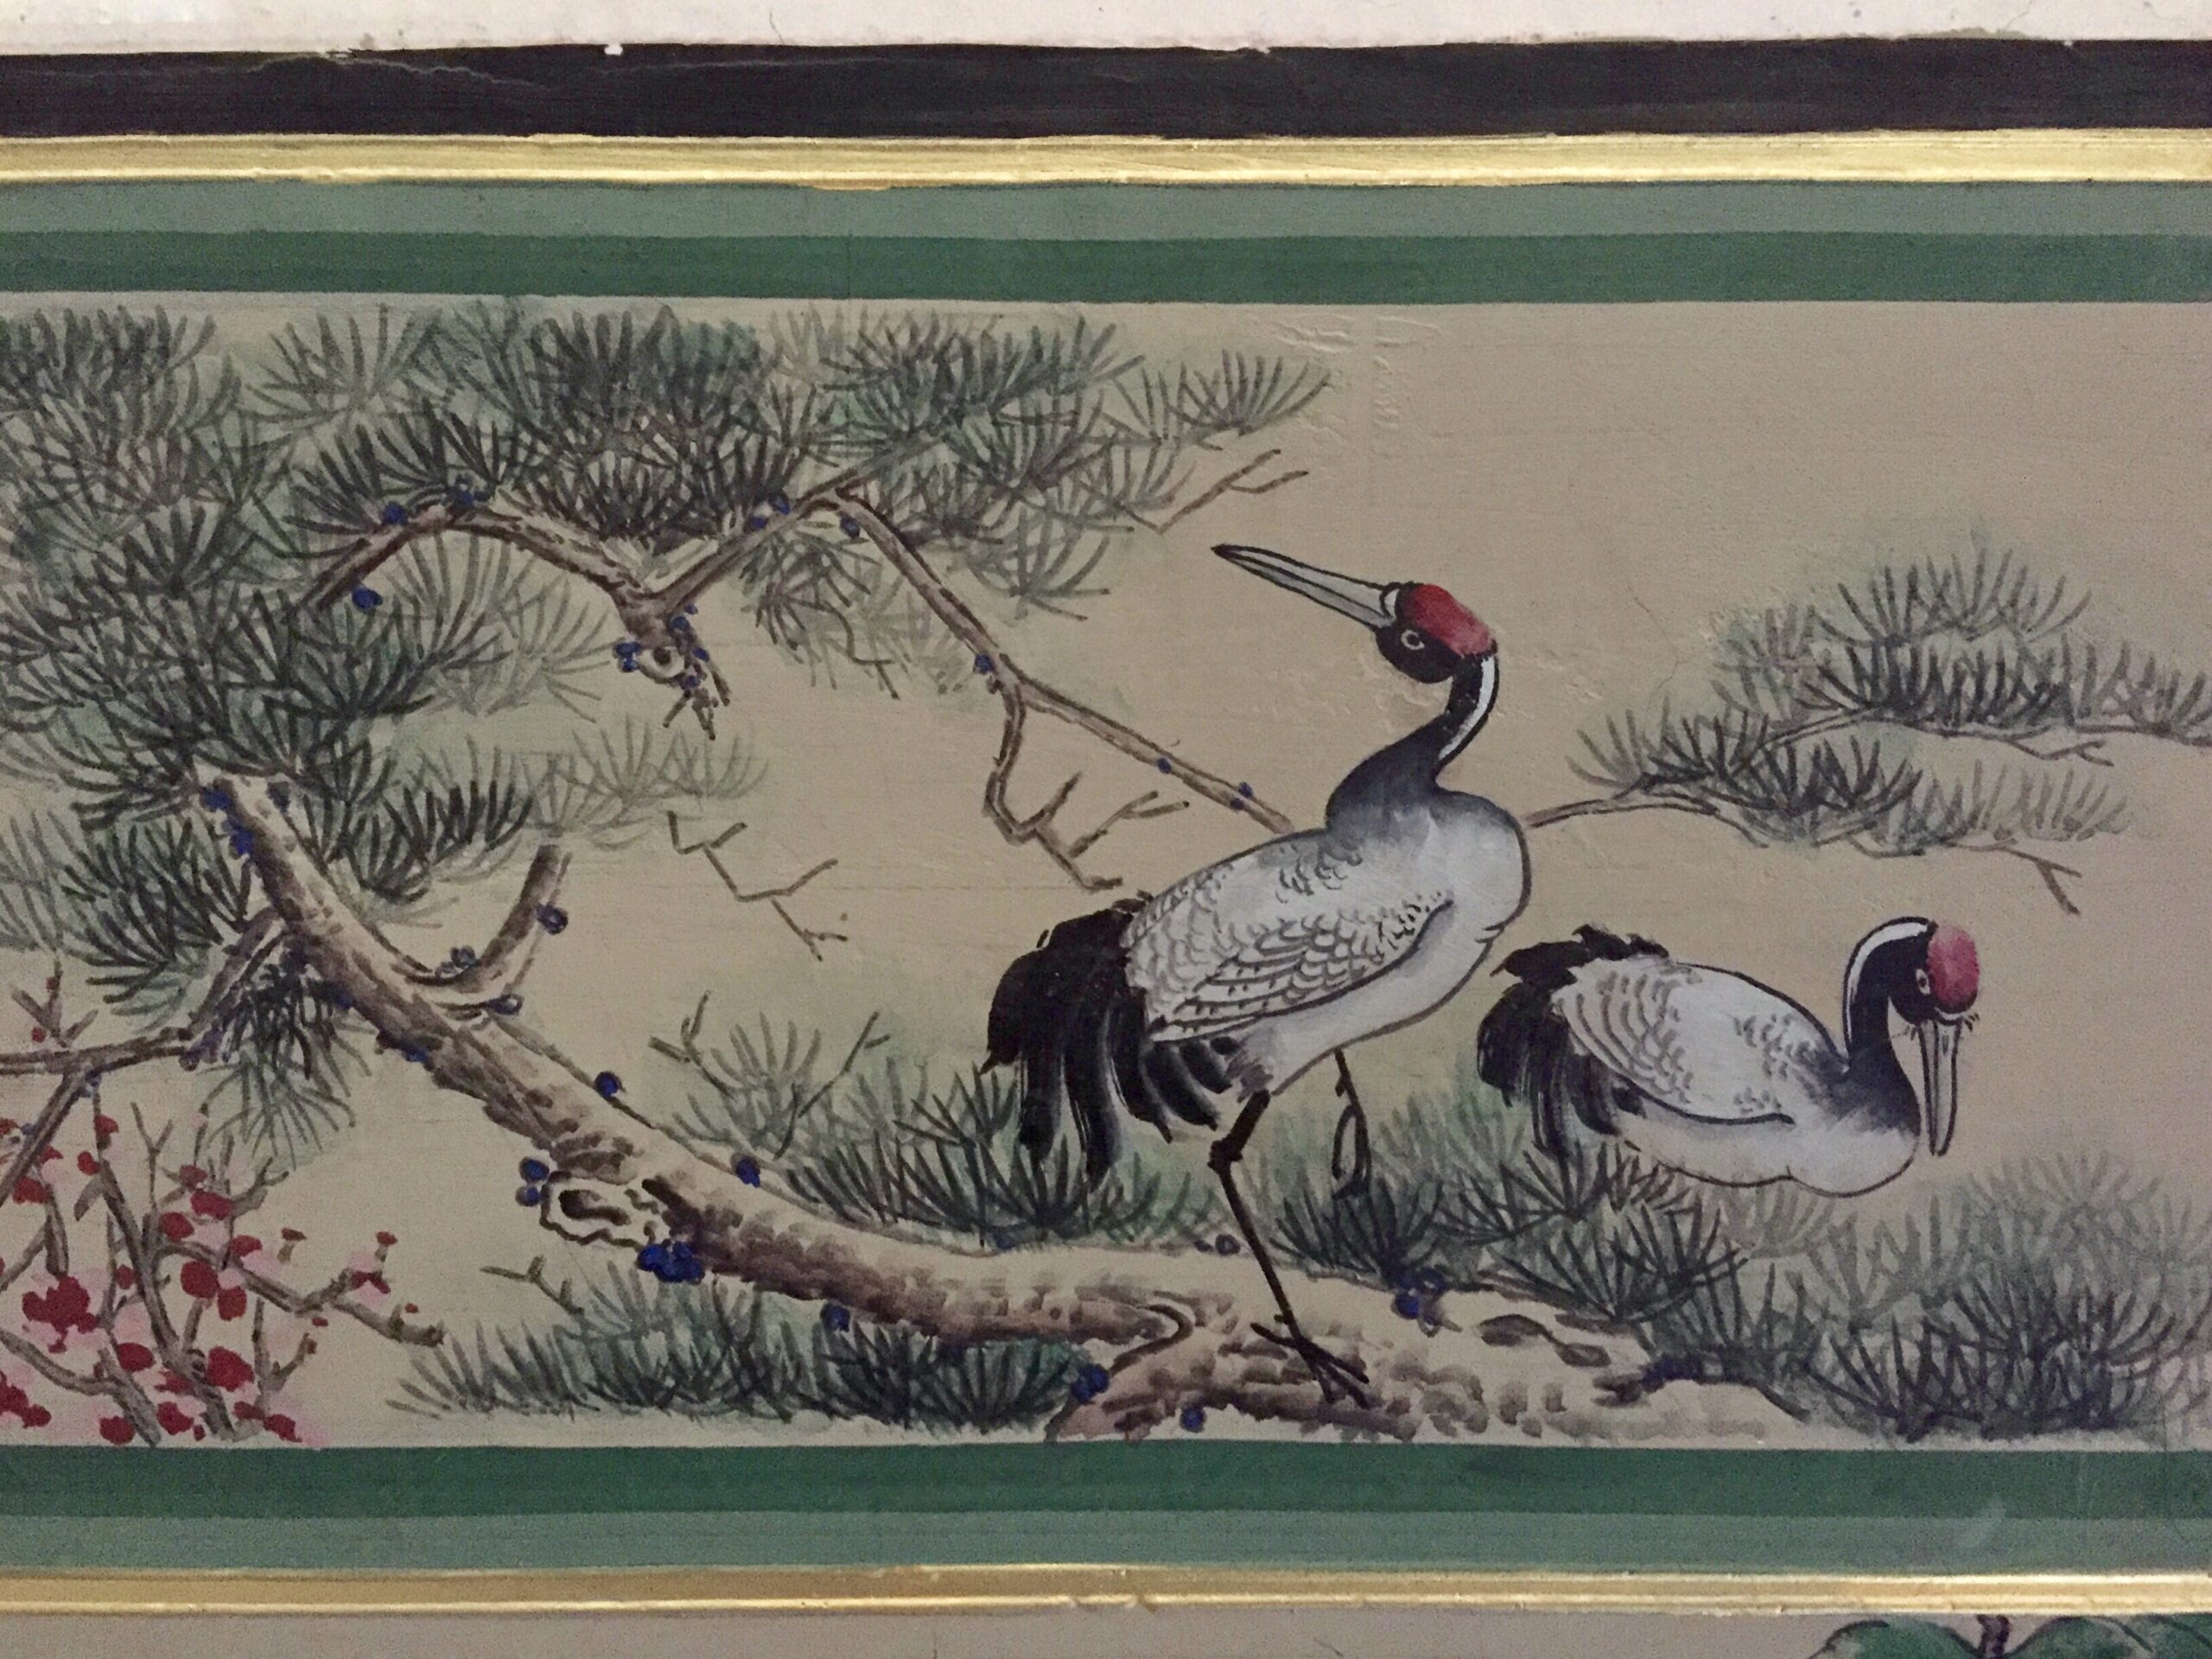 Reference photo of a painted wall showing two Japanese cranes on a pine tree branch